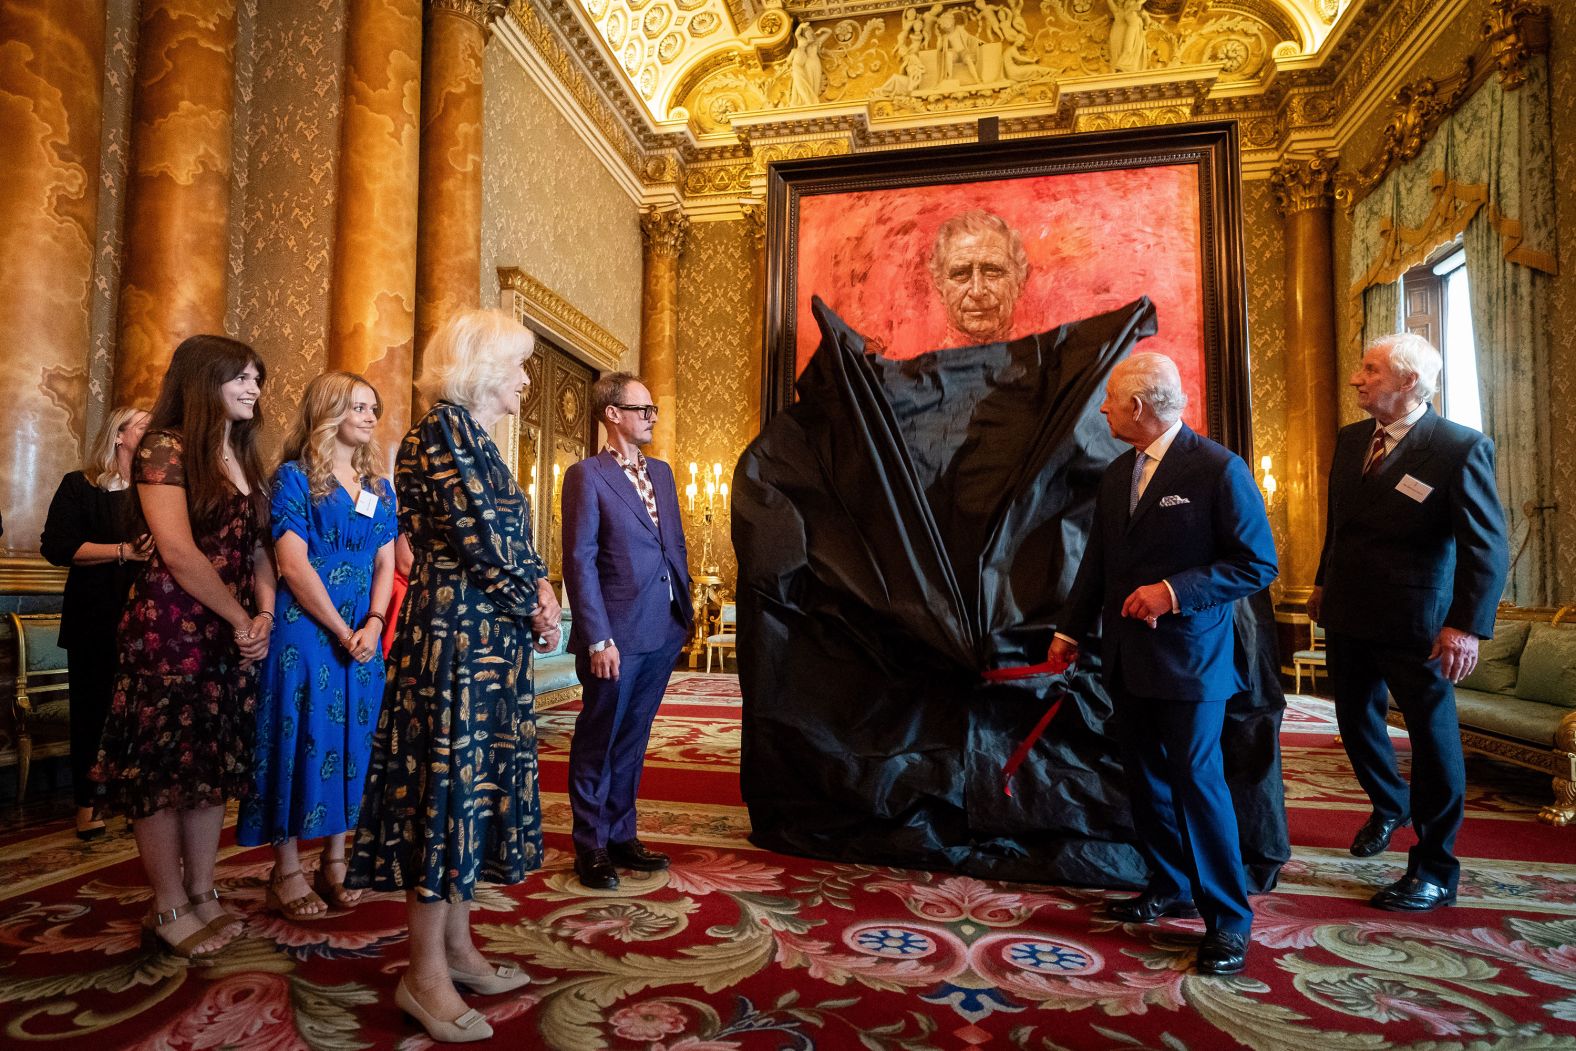 Britain's King Charles III unveils an official portrait of himself at London's Buckingham Palace on Tuesday, May 14. The portrait, by artist Jonathan Yeo, is the King's first official portrait since his coronation. And with its lurid red brushstrokes, <a href="index.php?page=&url=https%3A%2F%2Fwww.cnn.com%2F2024%2F05%2F15%2Fstyle%2Fking-charles-first-portrait-since-coronation-unveiled%2Findex.html" target="_blank">it is proving to be divisive</a>.